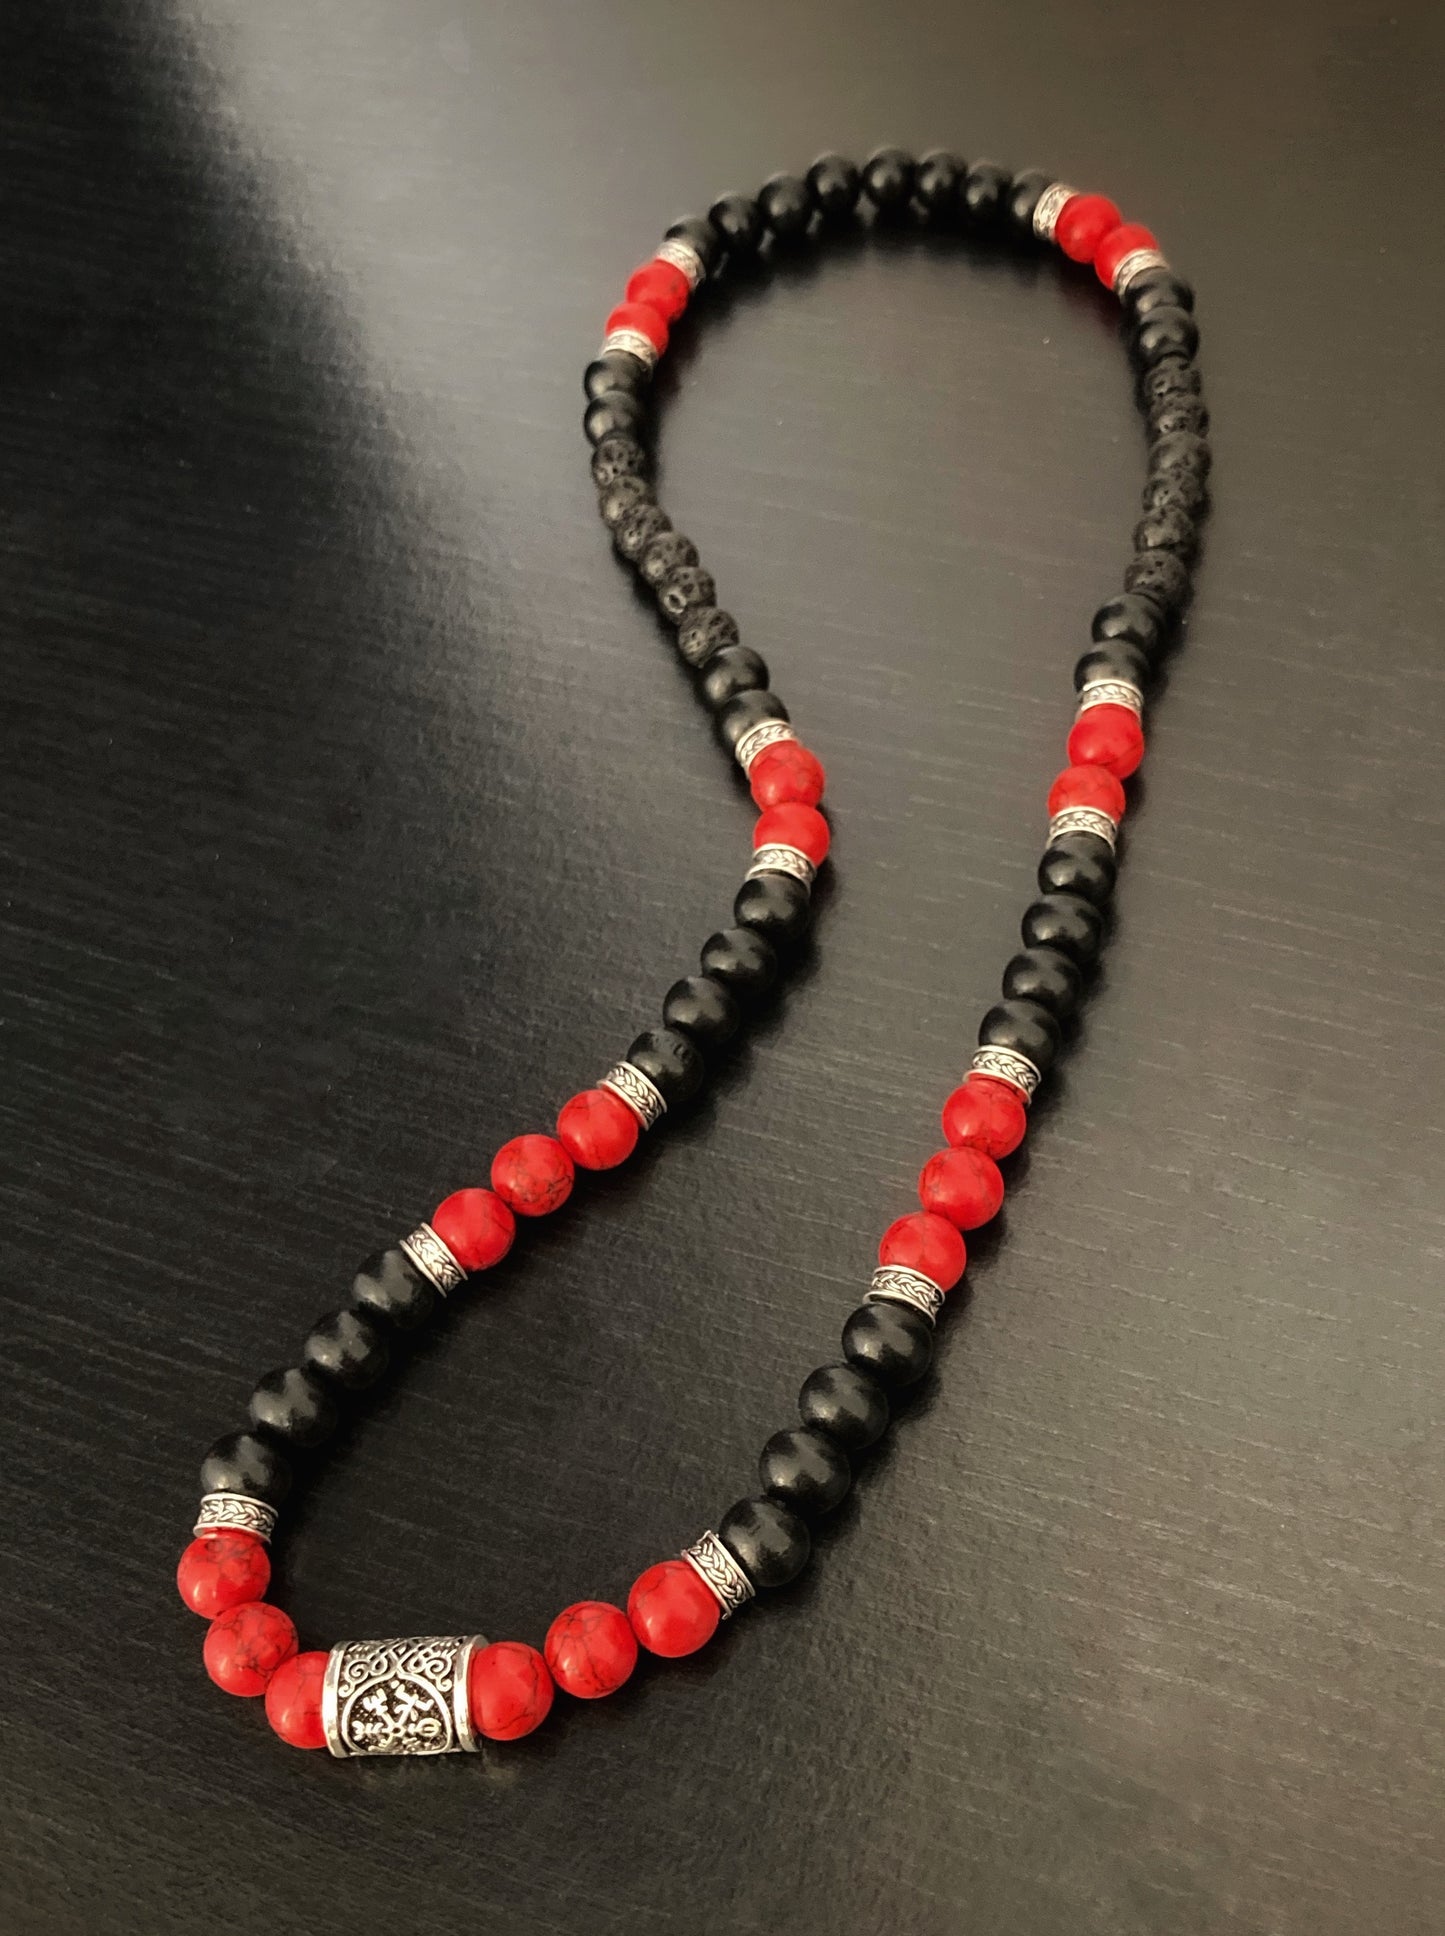 On a black surface sits a necklace made of beads. There are both black and red beads and these are broken up around the item with small metal ring shapes that are patterned.